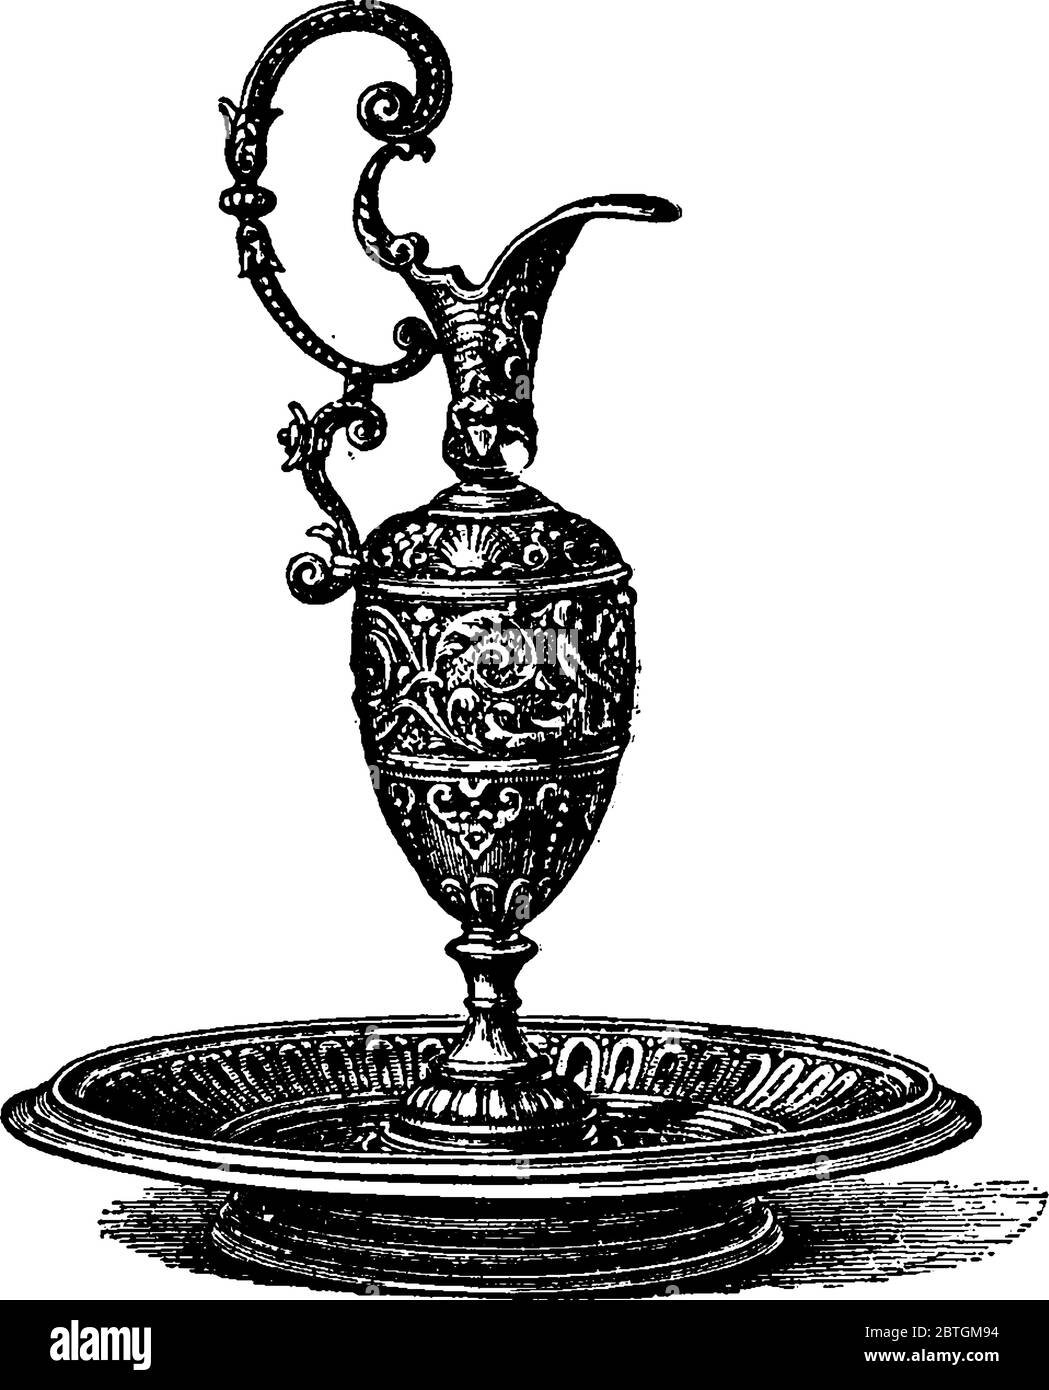 A bronze beaker that rests on a dish at its base, from Germany. It has some decorations and engravings on it, vintage line drawing or engraving illust Stock Vector